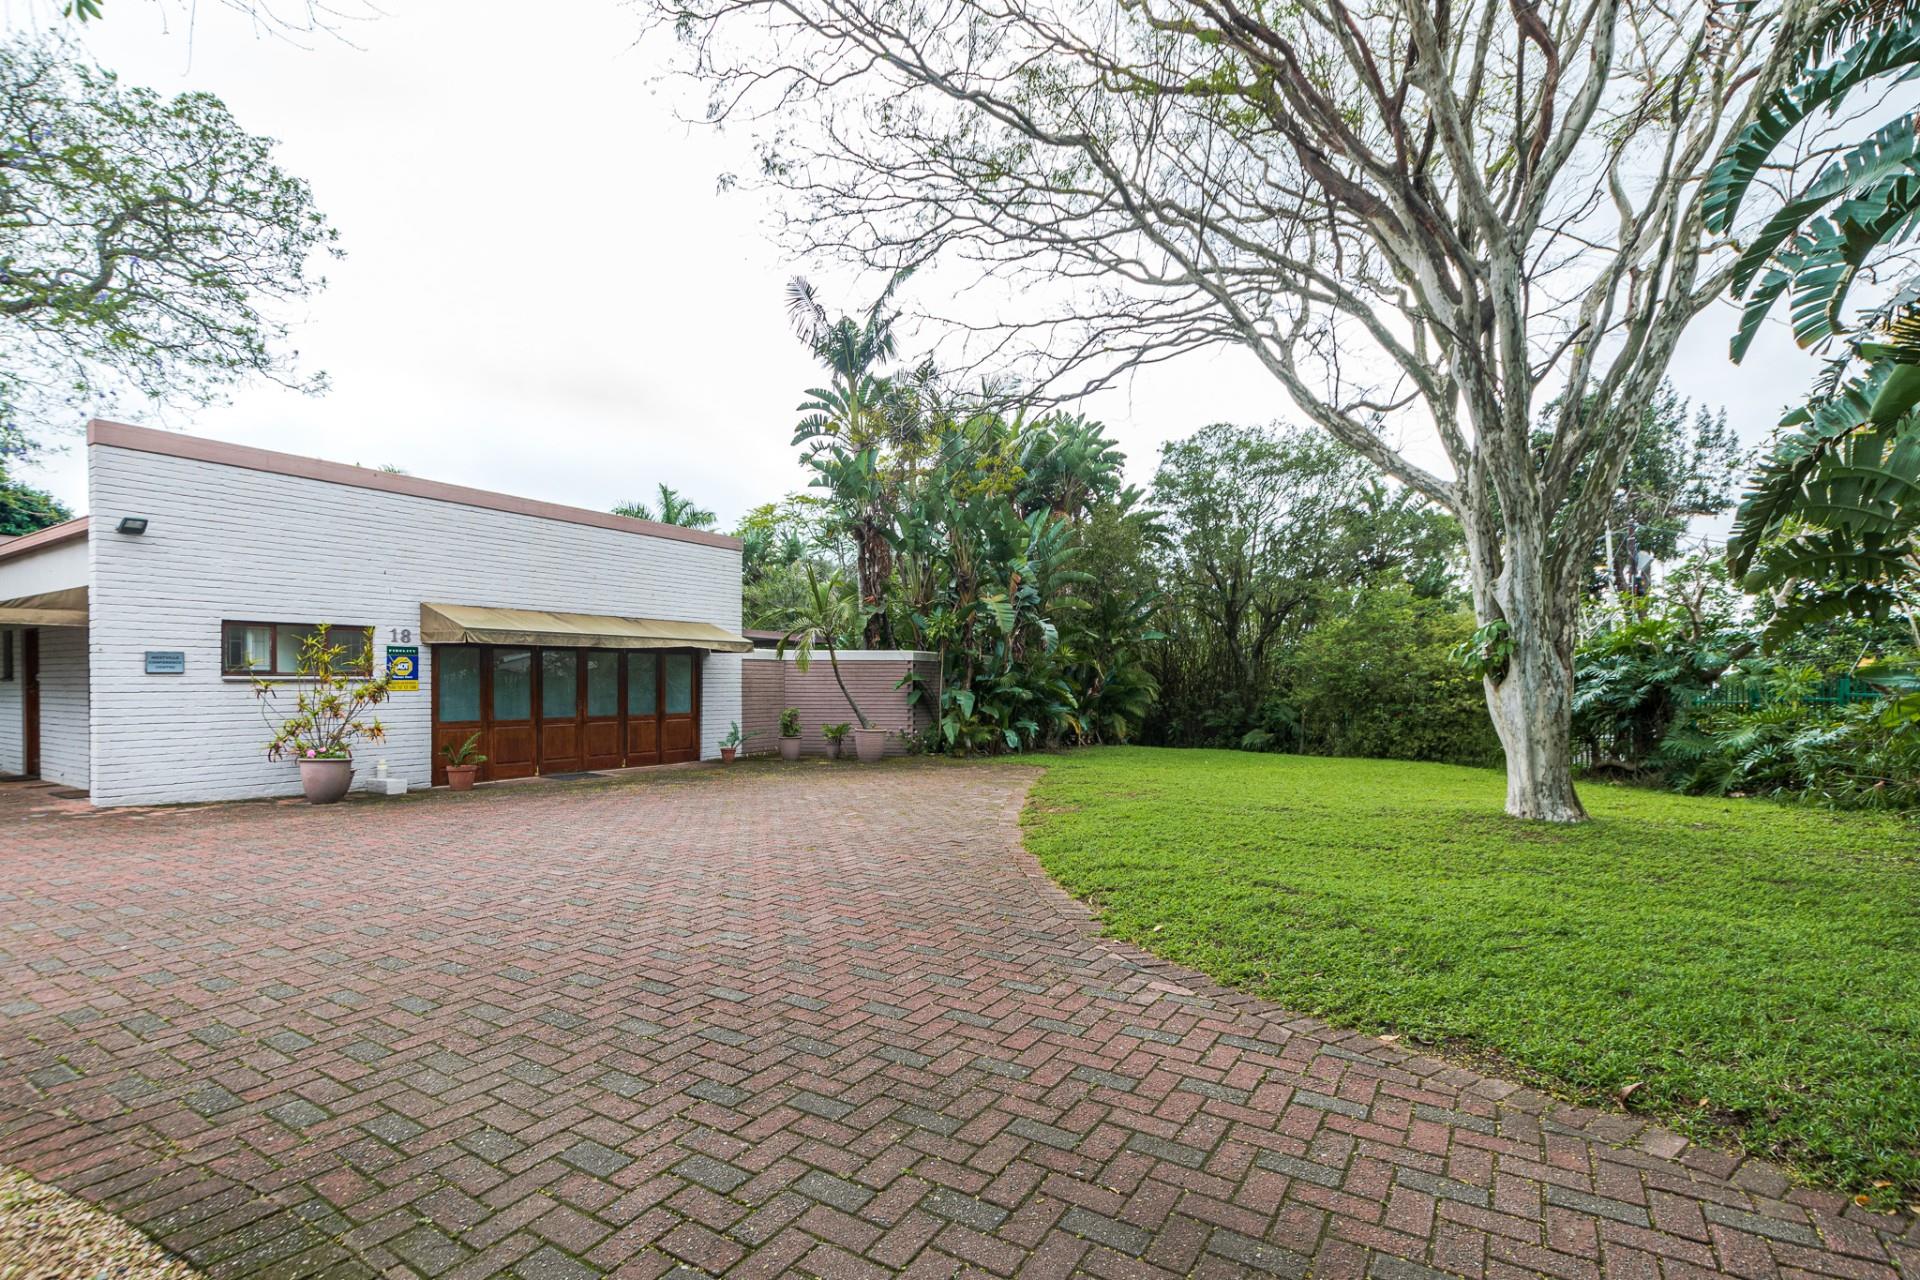 6 Bedroom House For Sale in Westville Central | RE/MAX™ of Southern Africa